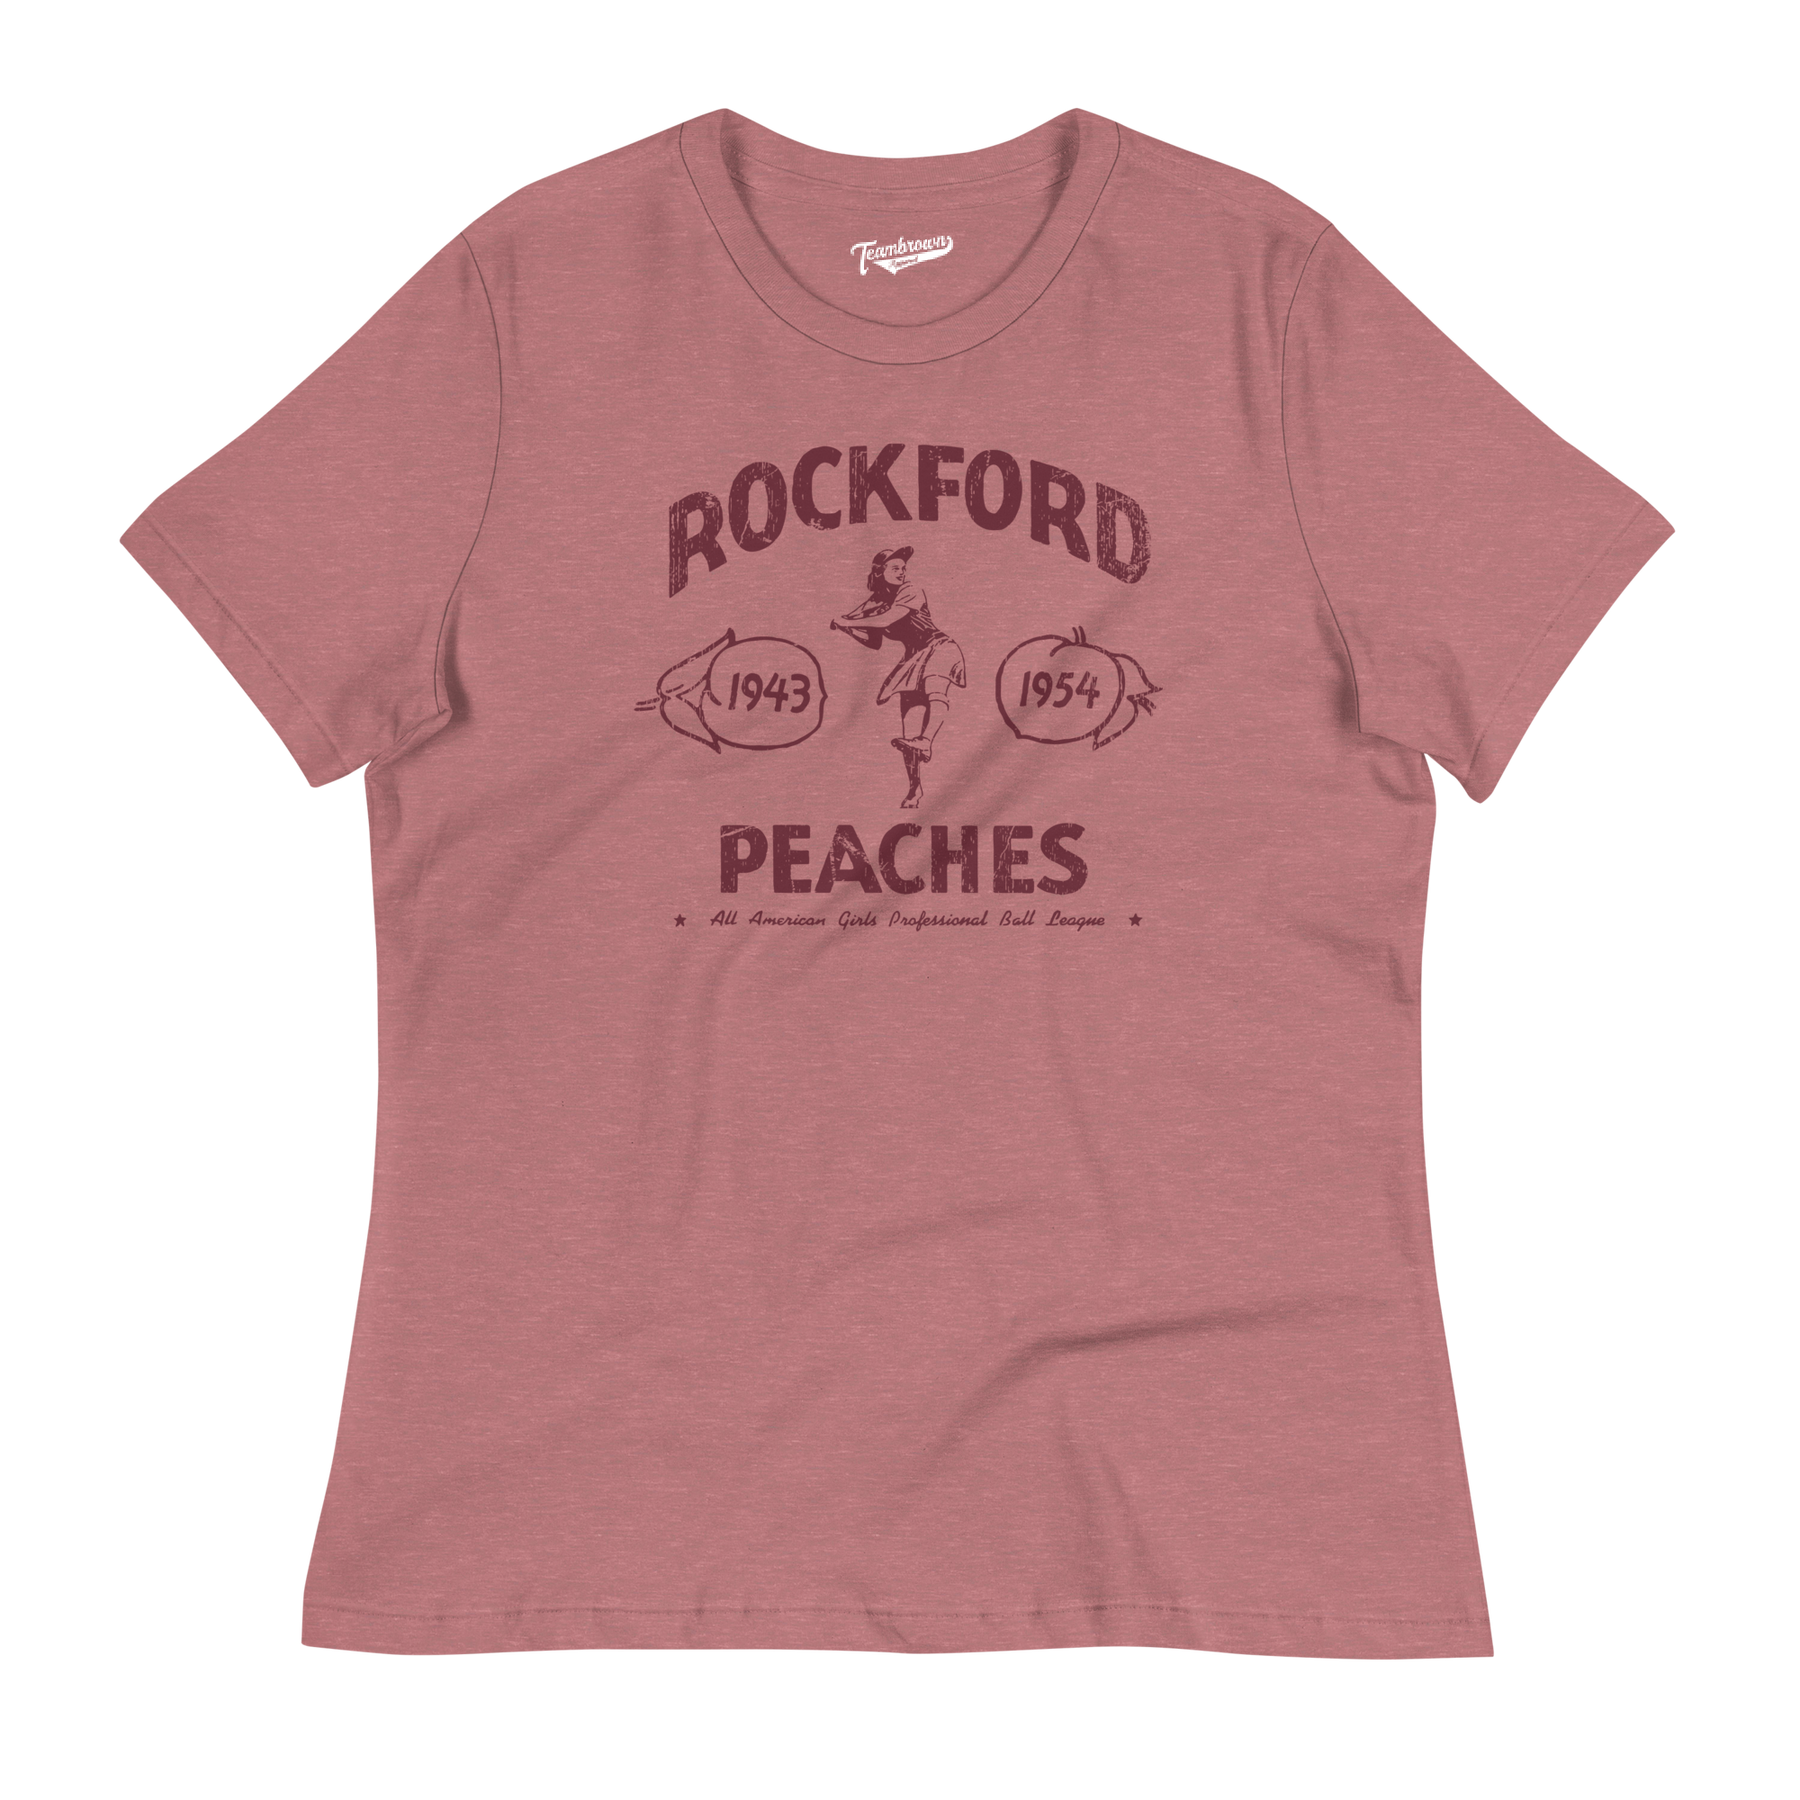 Rockford Peaches Program - Women's Relaxed Fit T-Shirt | Officially Licensed - AAGPBL